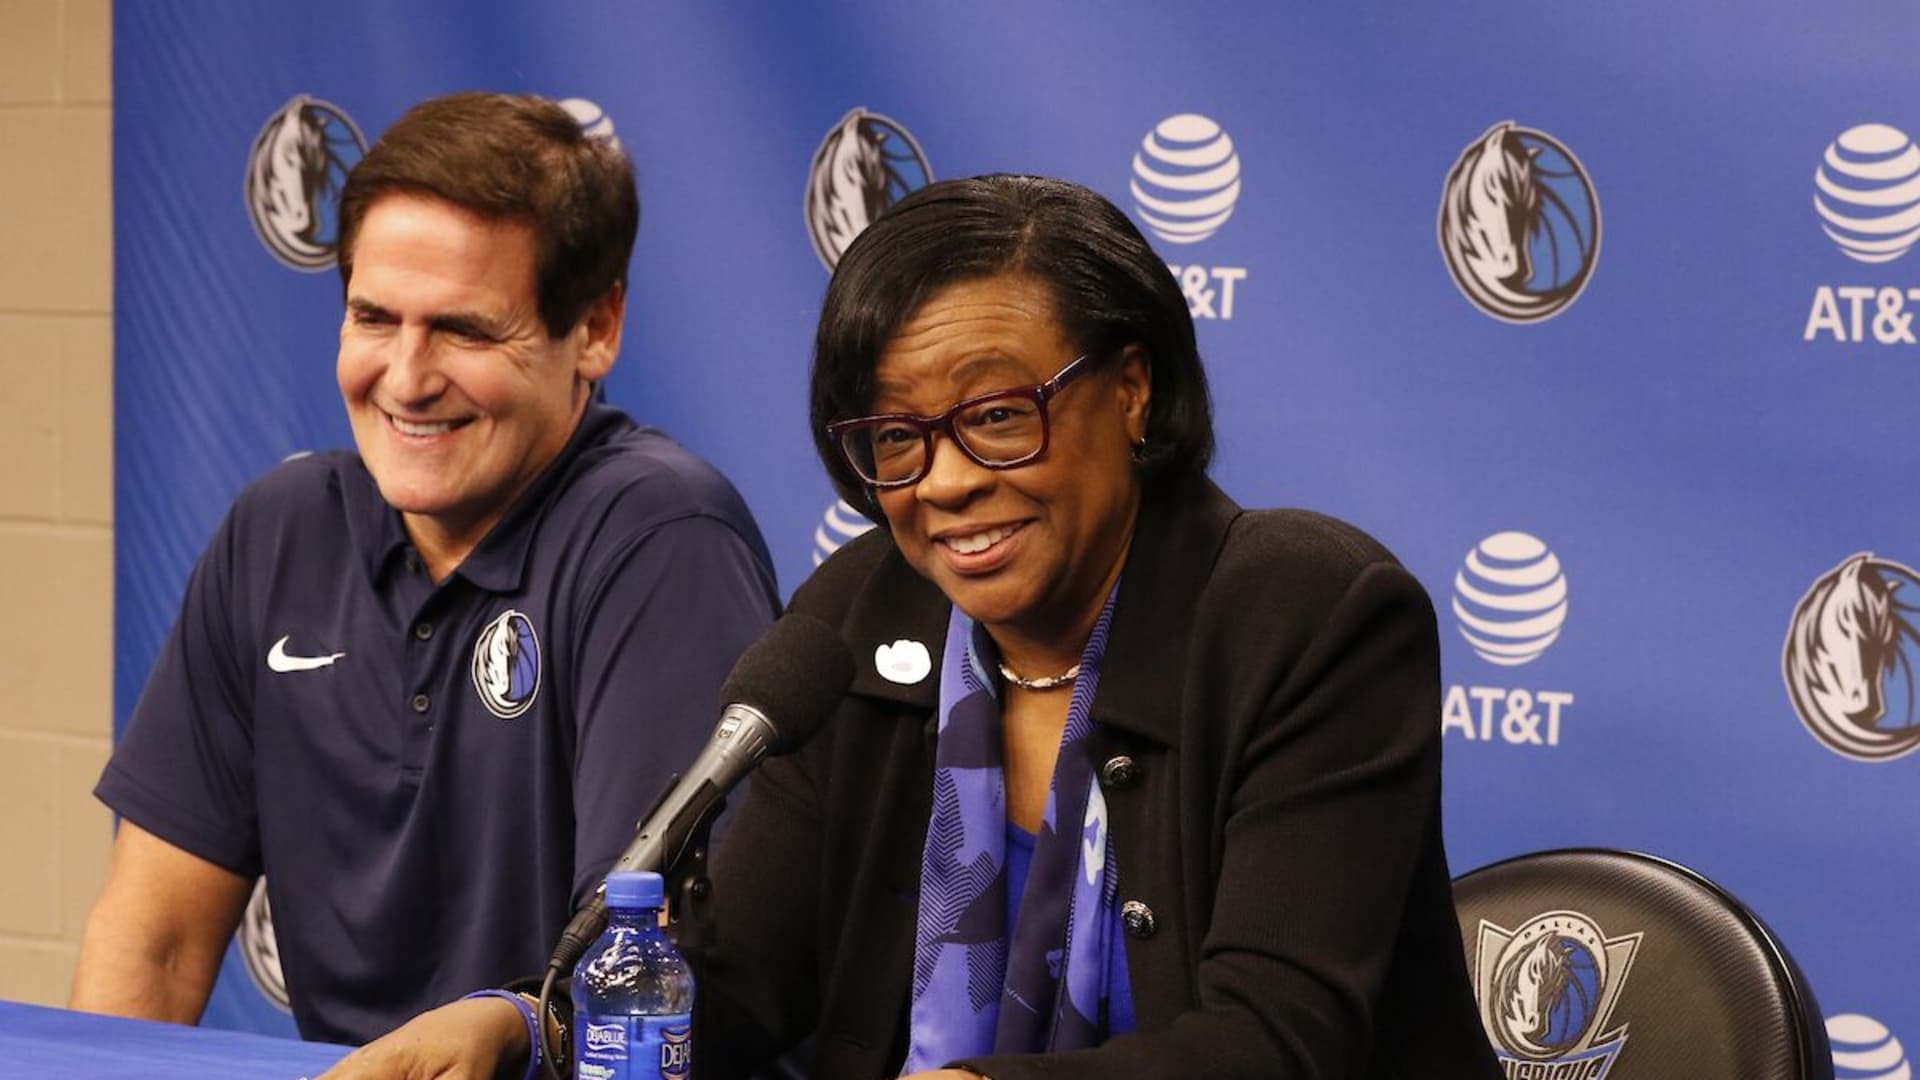 Mark Cuban cold-called the Dallas Mavericks' CEO to get her to take the job